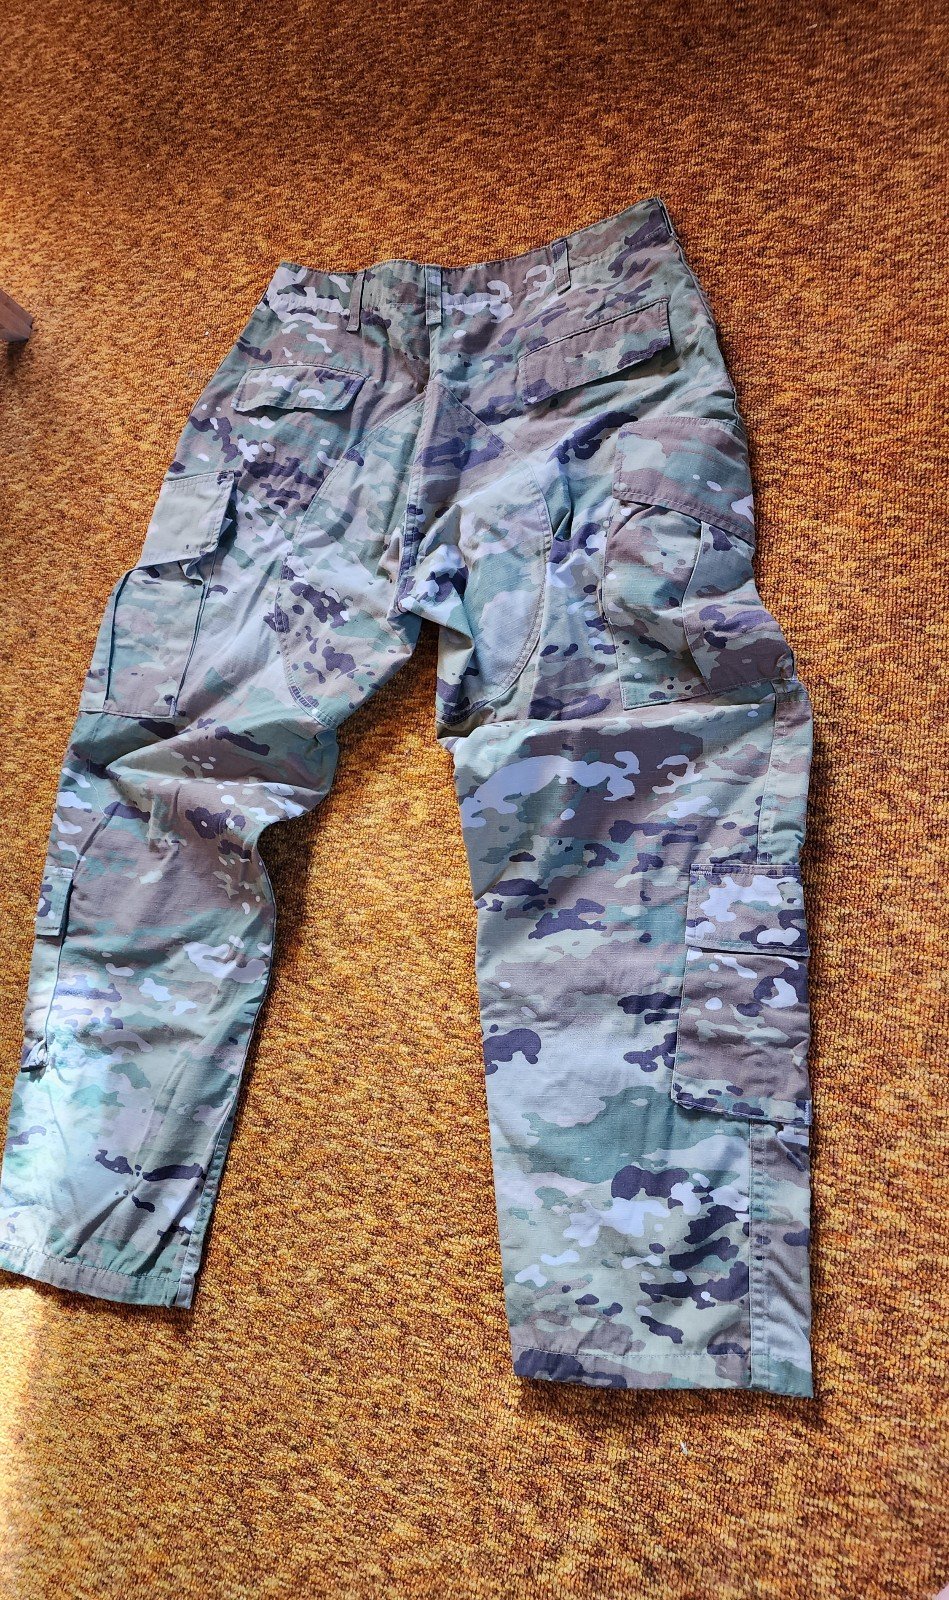 The Best Seller camouflage cargo pants HVSHXUnWt just for you